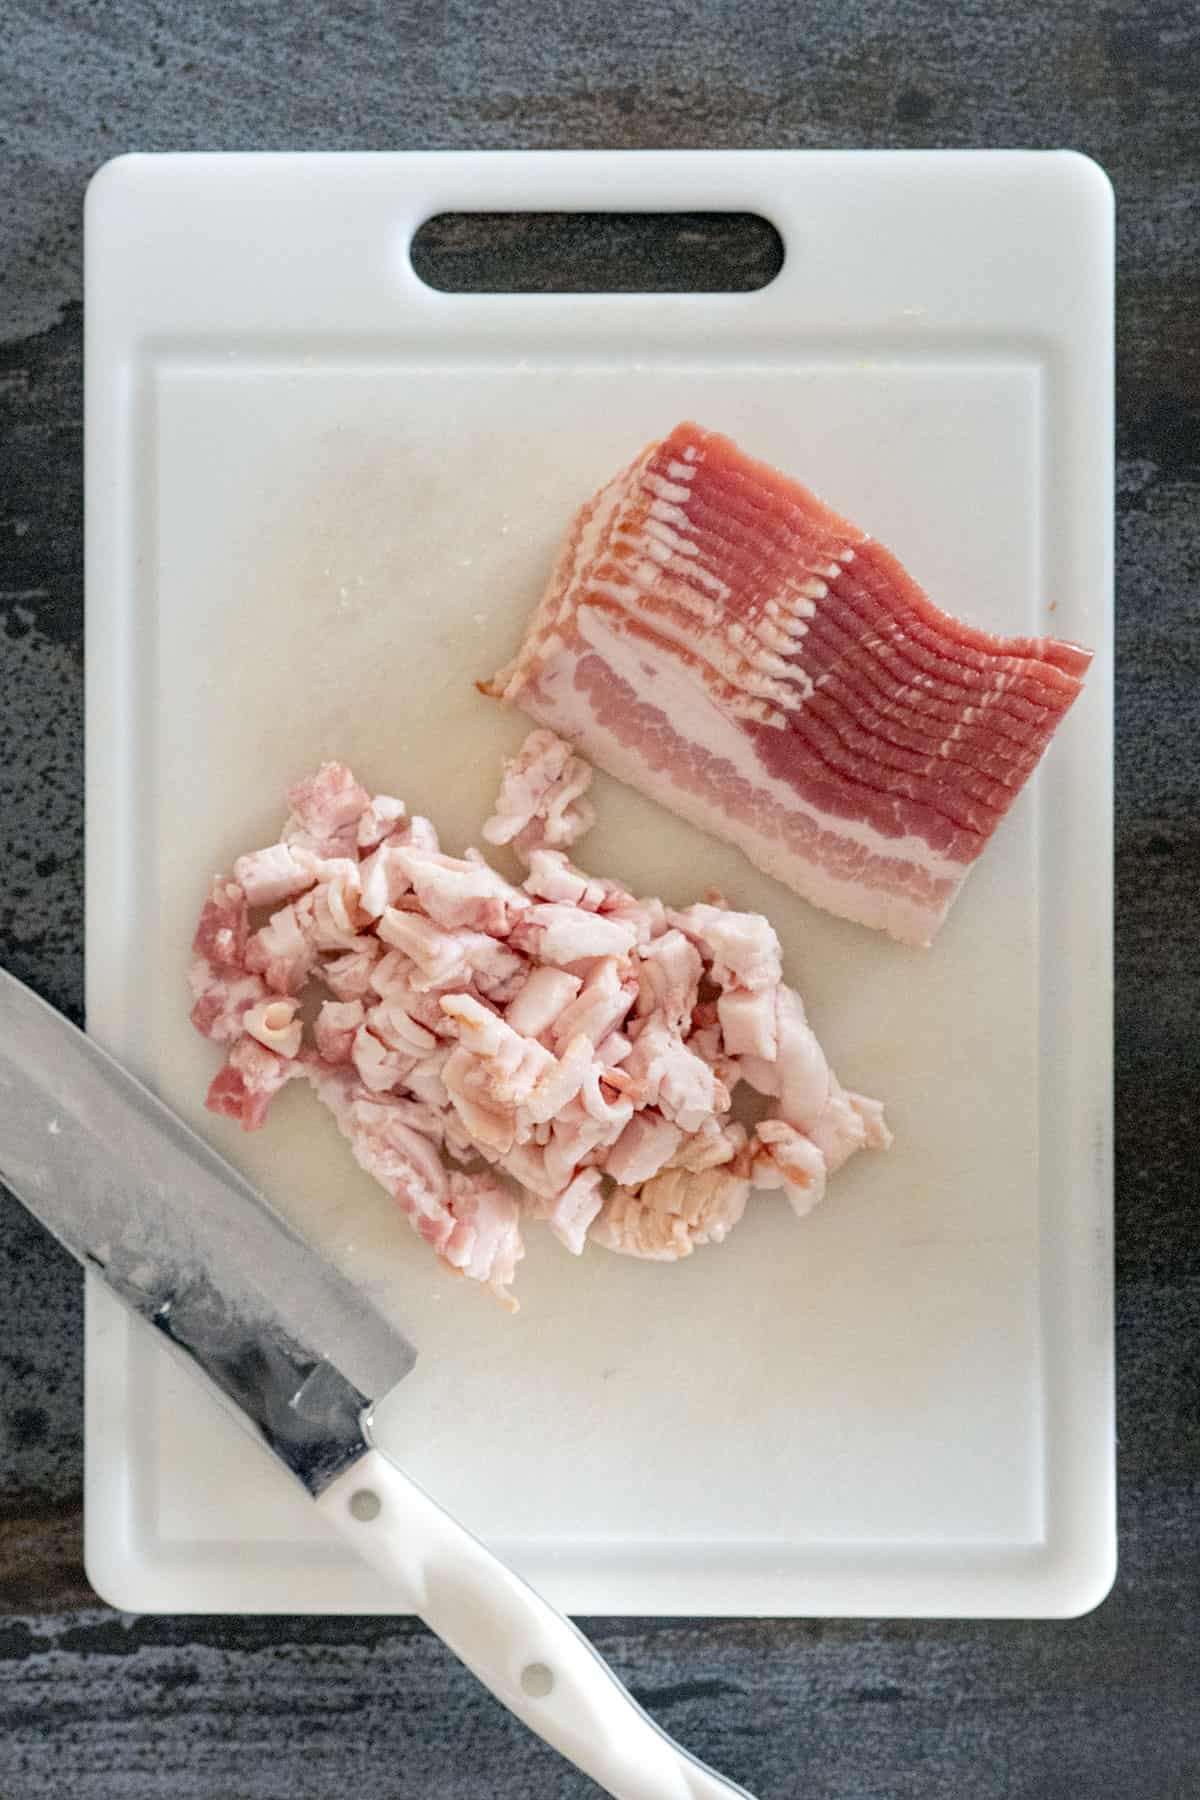 bacon on cutting board diced into smaller pieces.